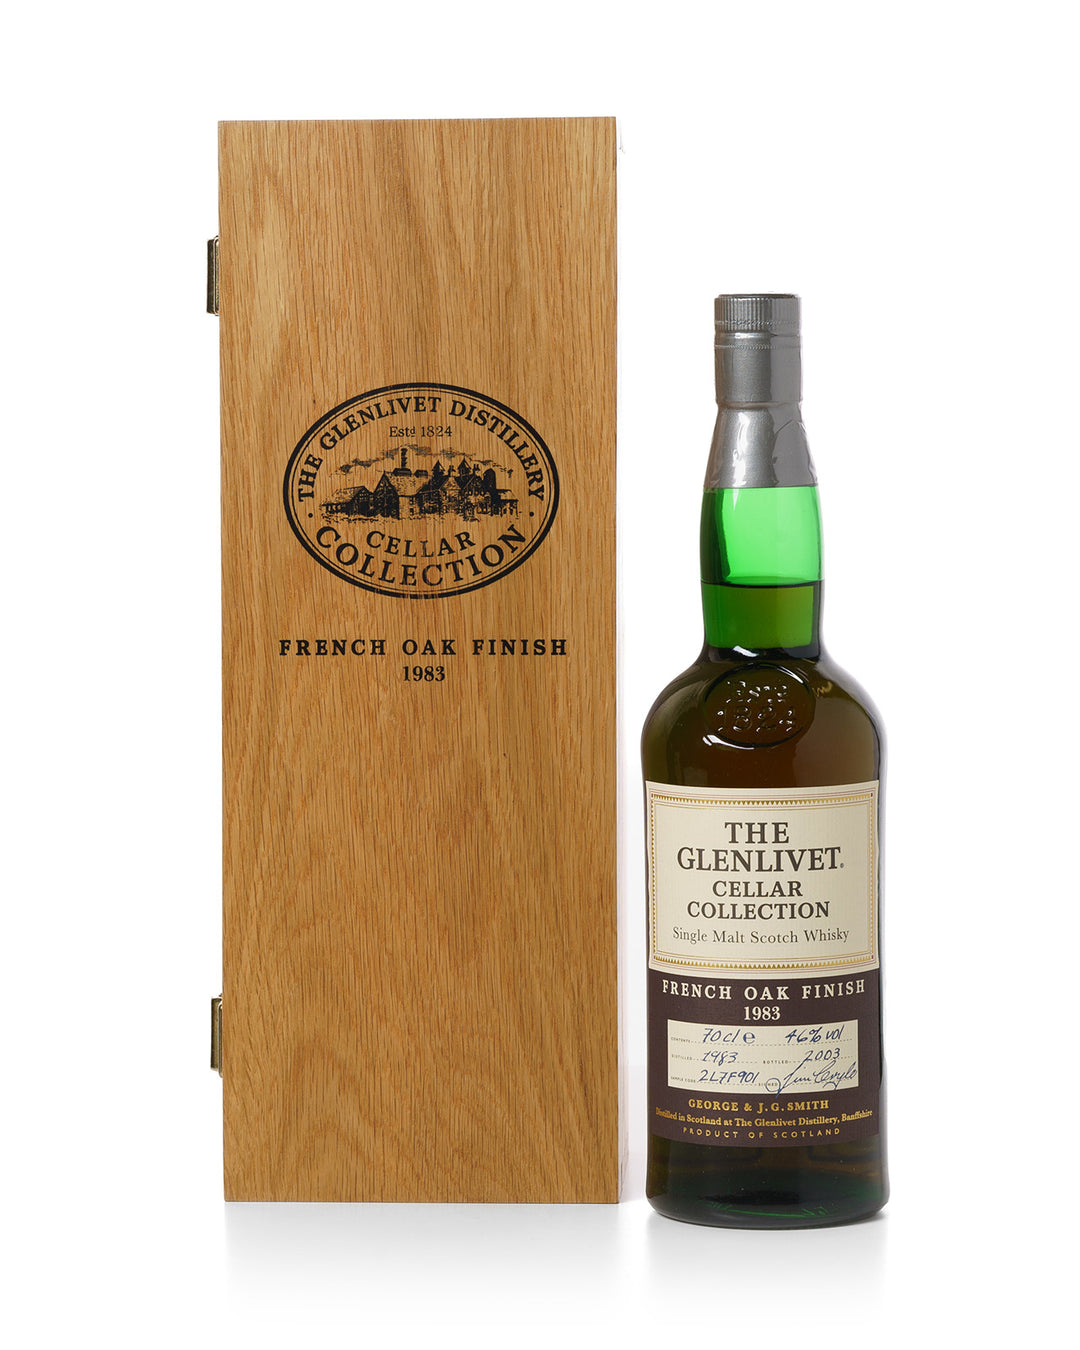 Glenlivet 1983 French Oak Finish Cellar Collection With Original Wooden Box